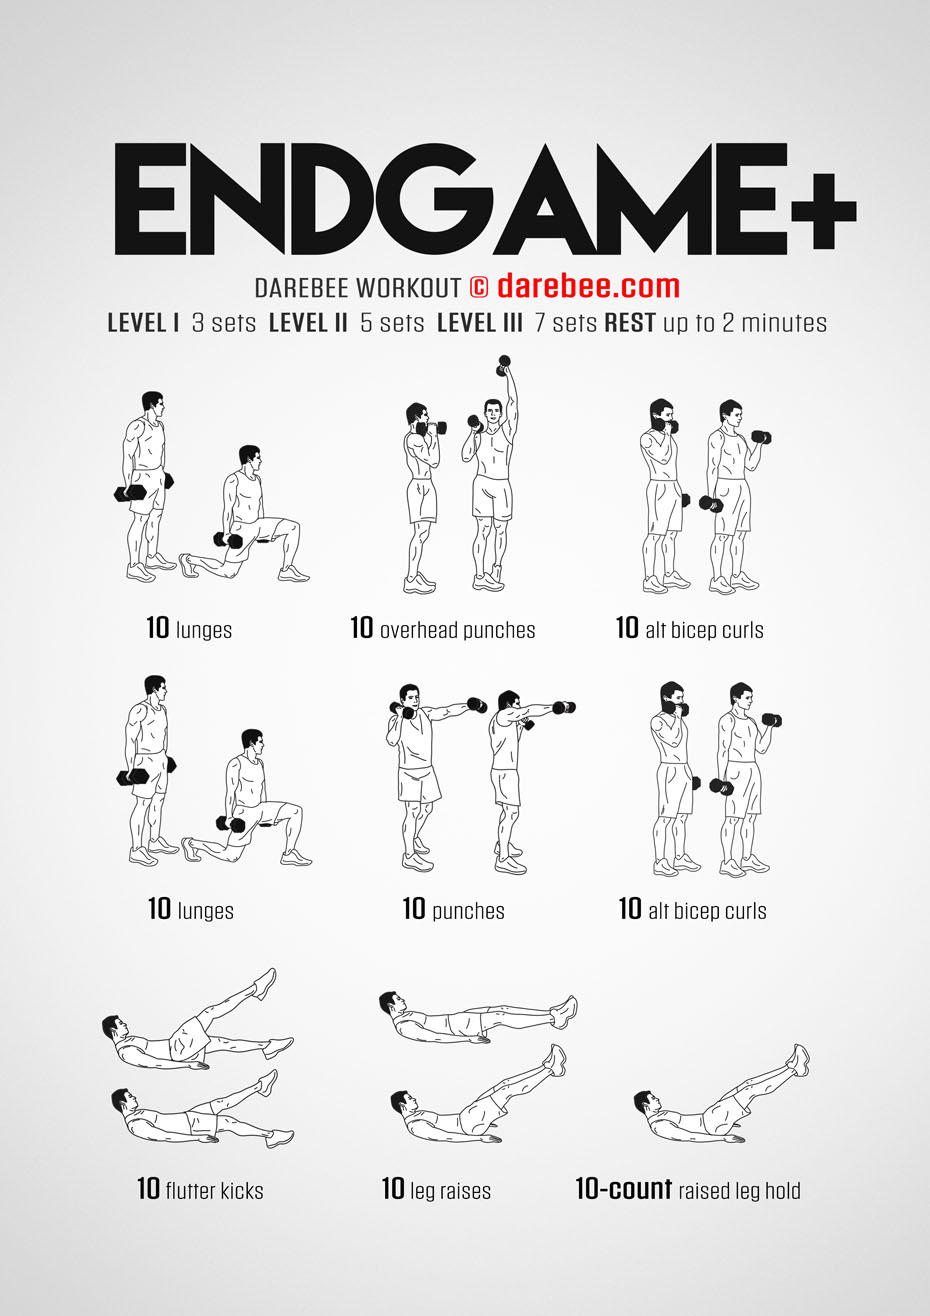 THE FLOW Full Body Workout with Dumbbells  EPIC Endgame Day 44 – 2 Lazy 4  the Gym